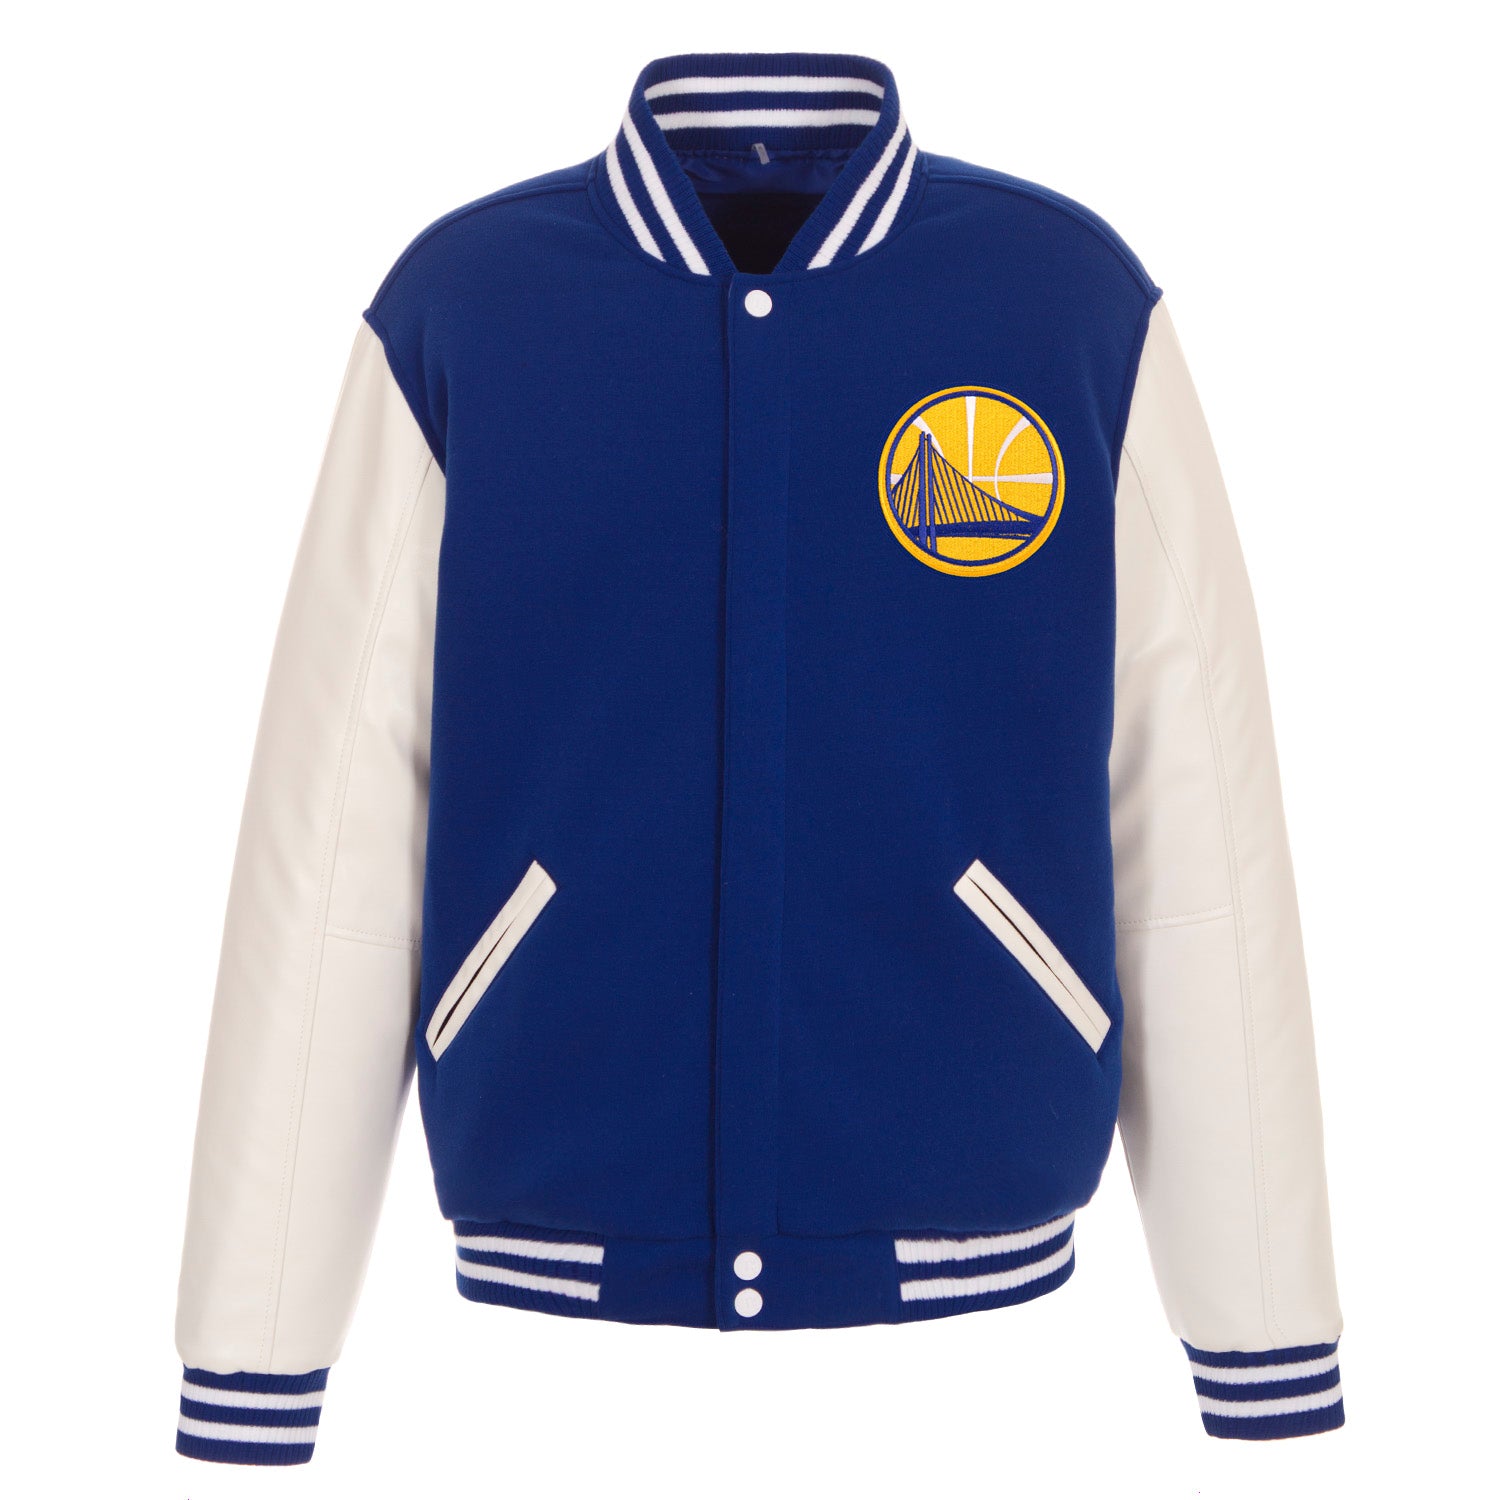 Men's JH Design Navy/White St. Louis Blues Reversible Fleece Jacket with Faux Leather Sleeves